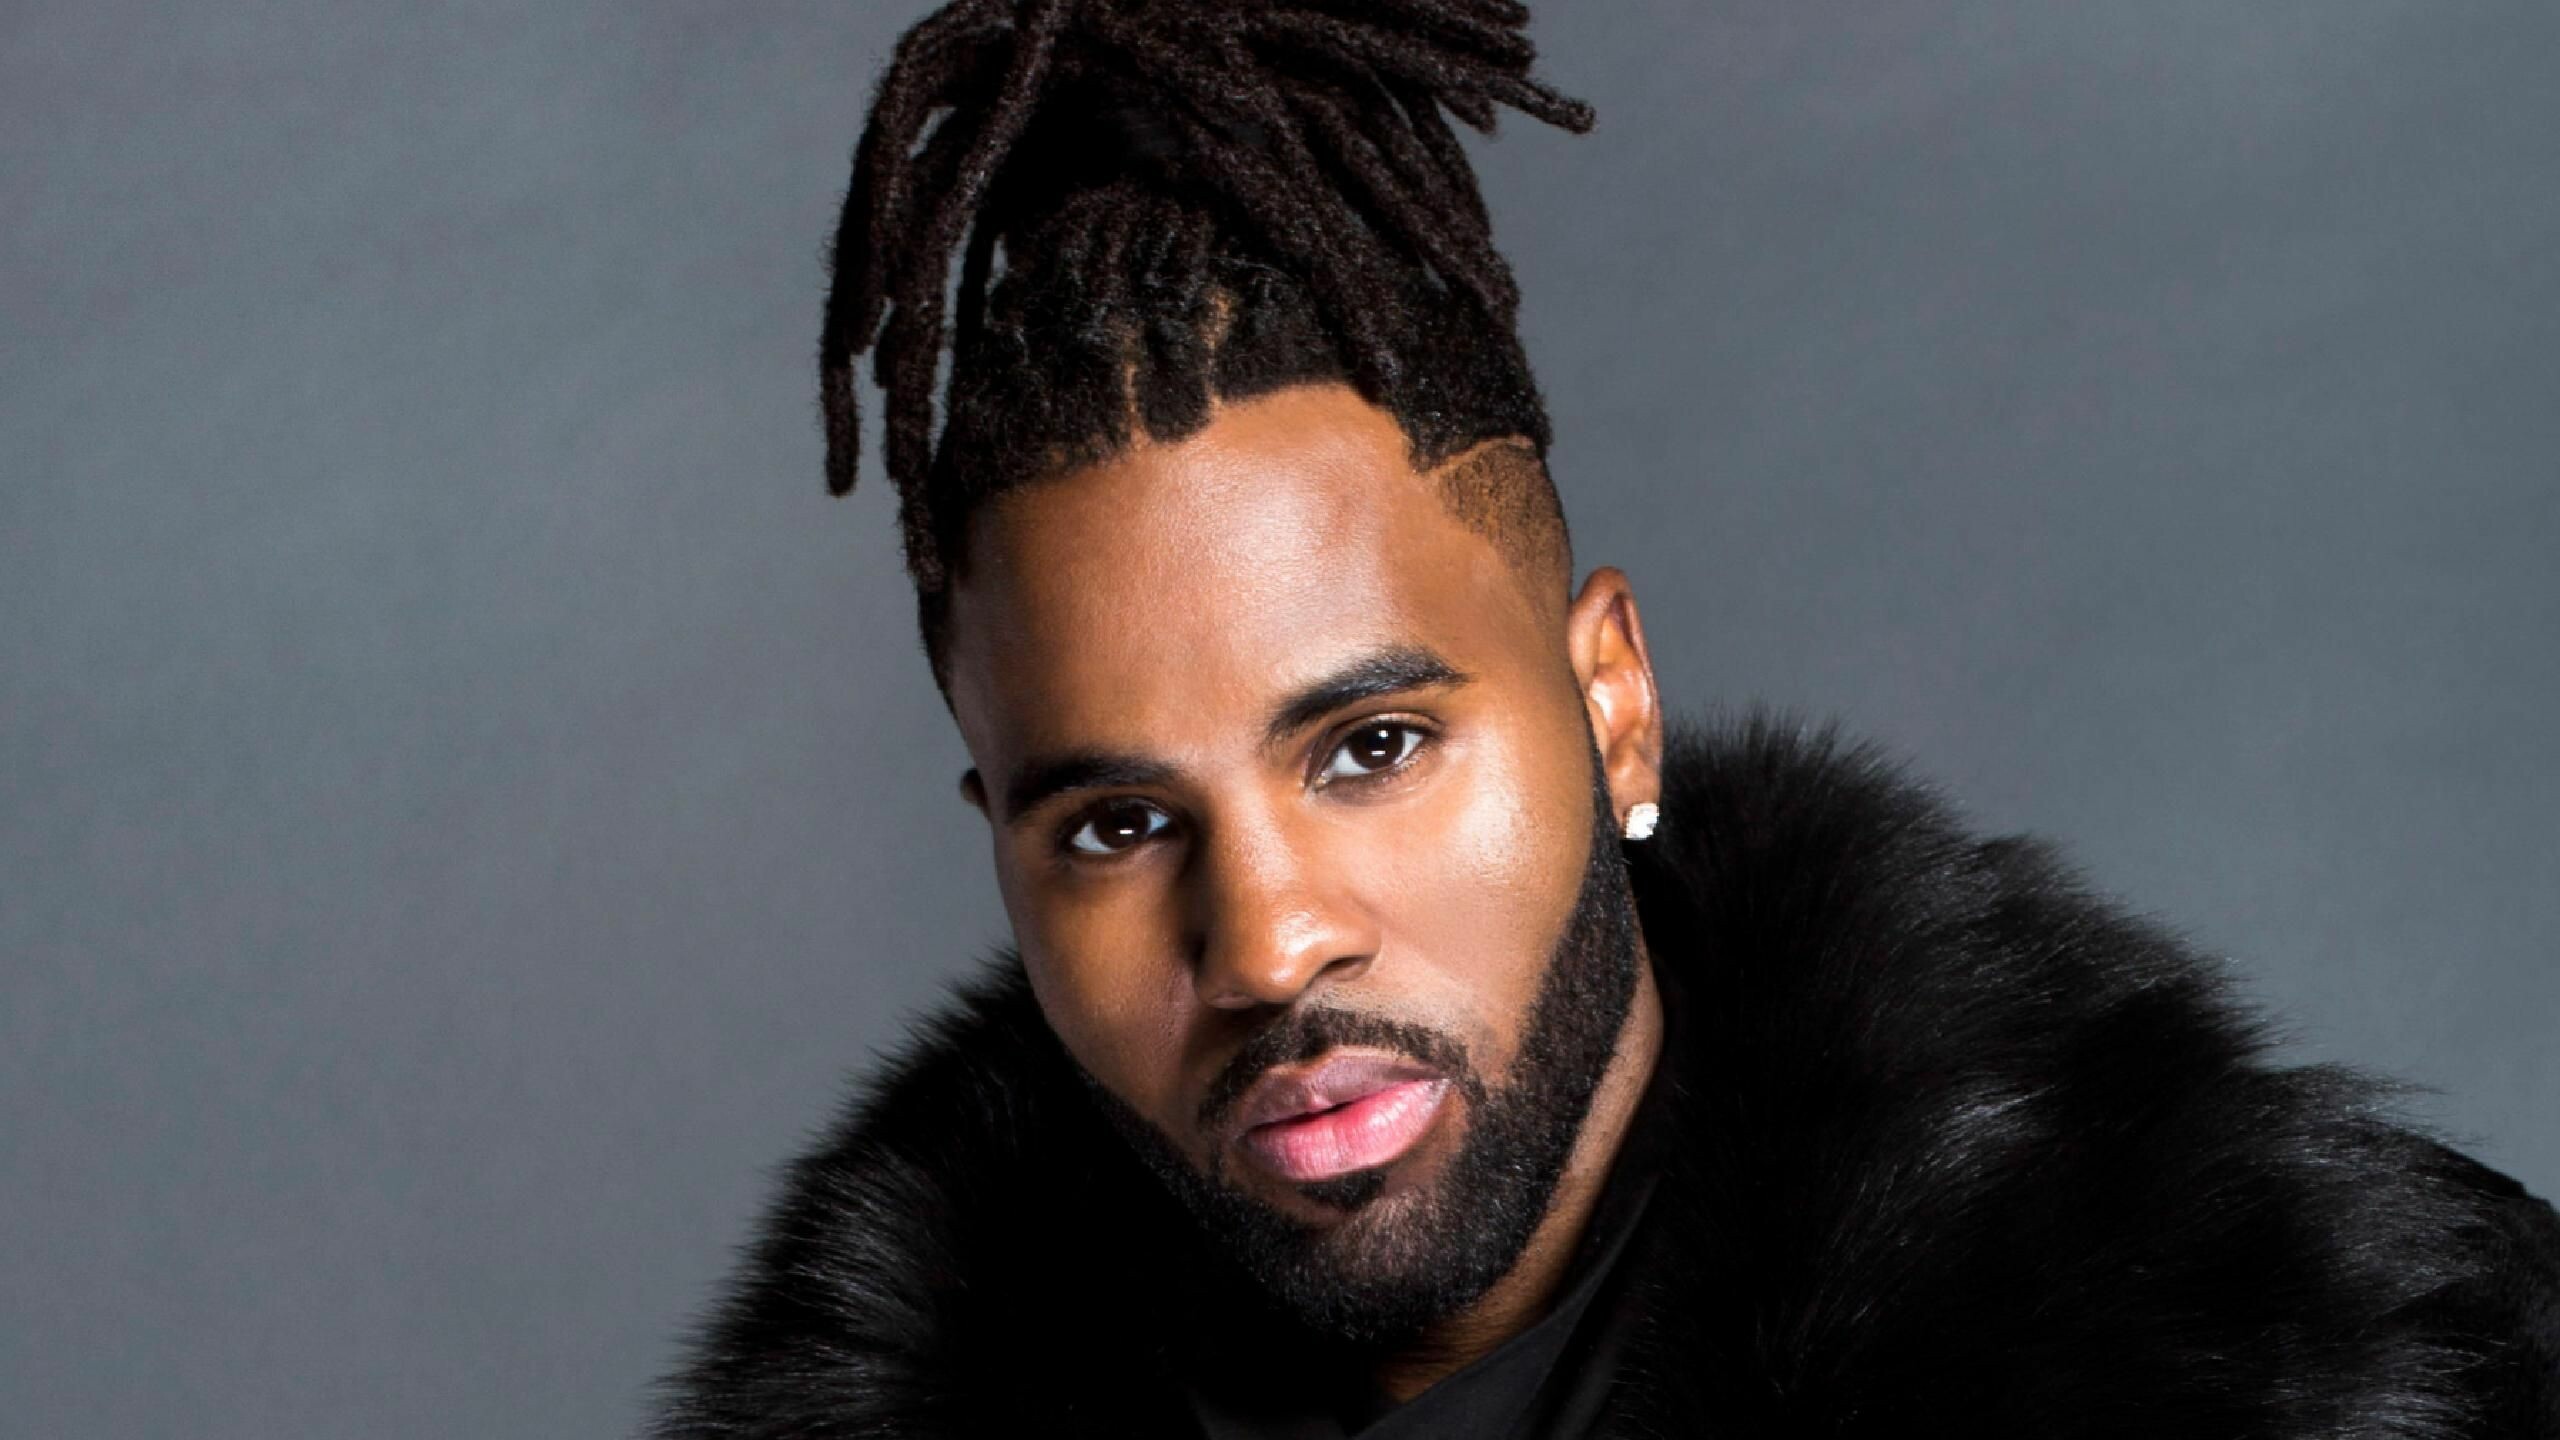 Jason Derulo: "Breathing" was released to contemporary hit radio in Australia on October 24, 2011. 2560x1440 HD Wallpaper.